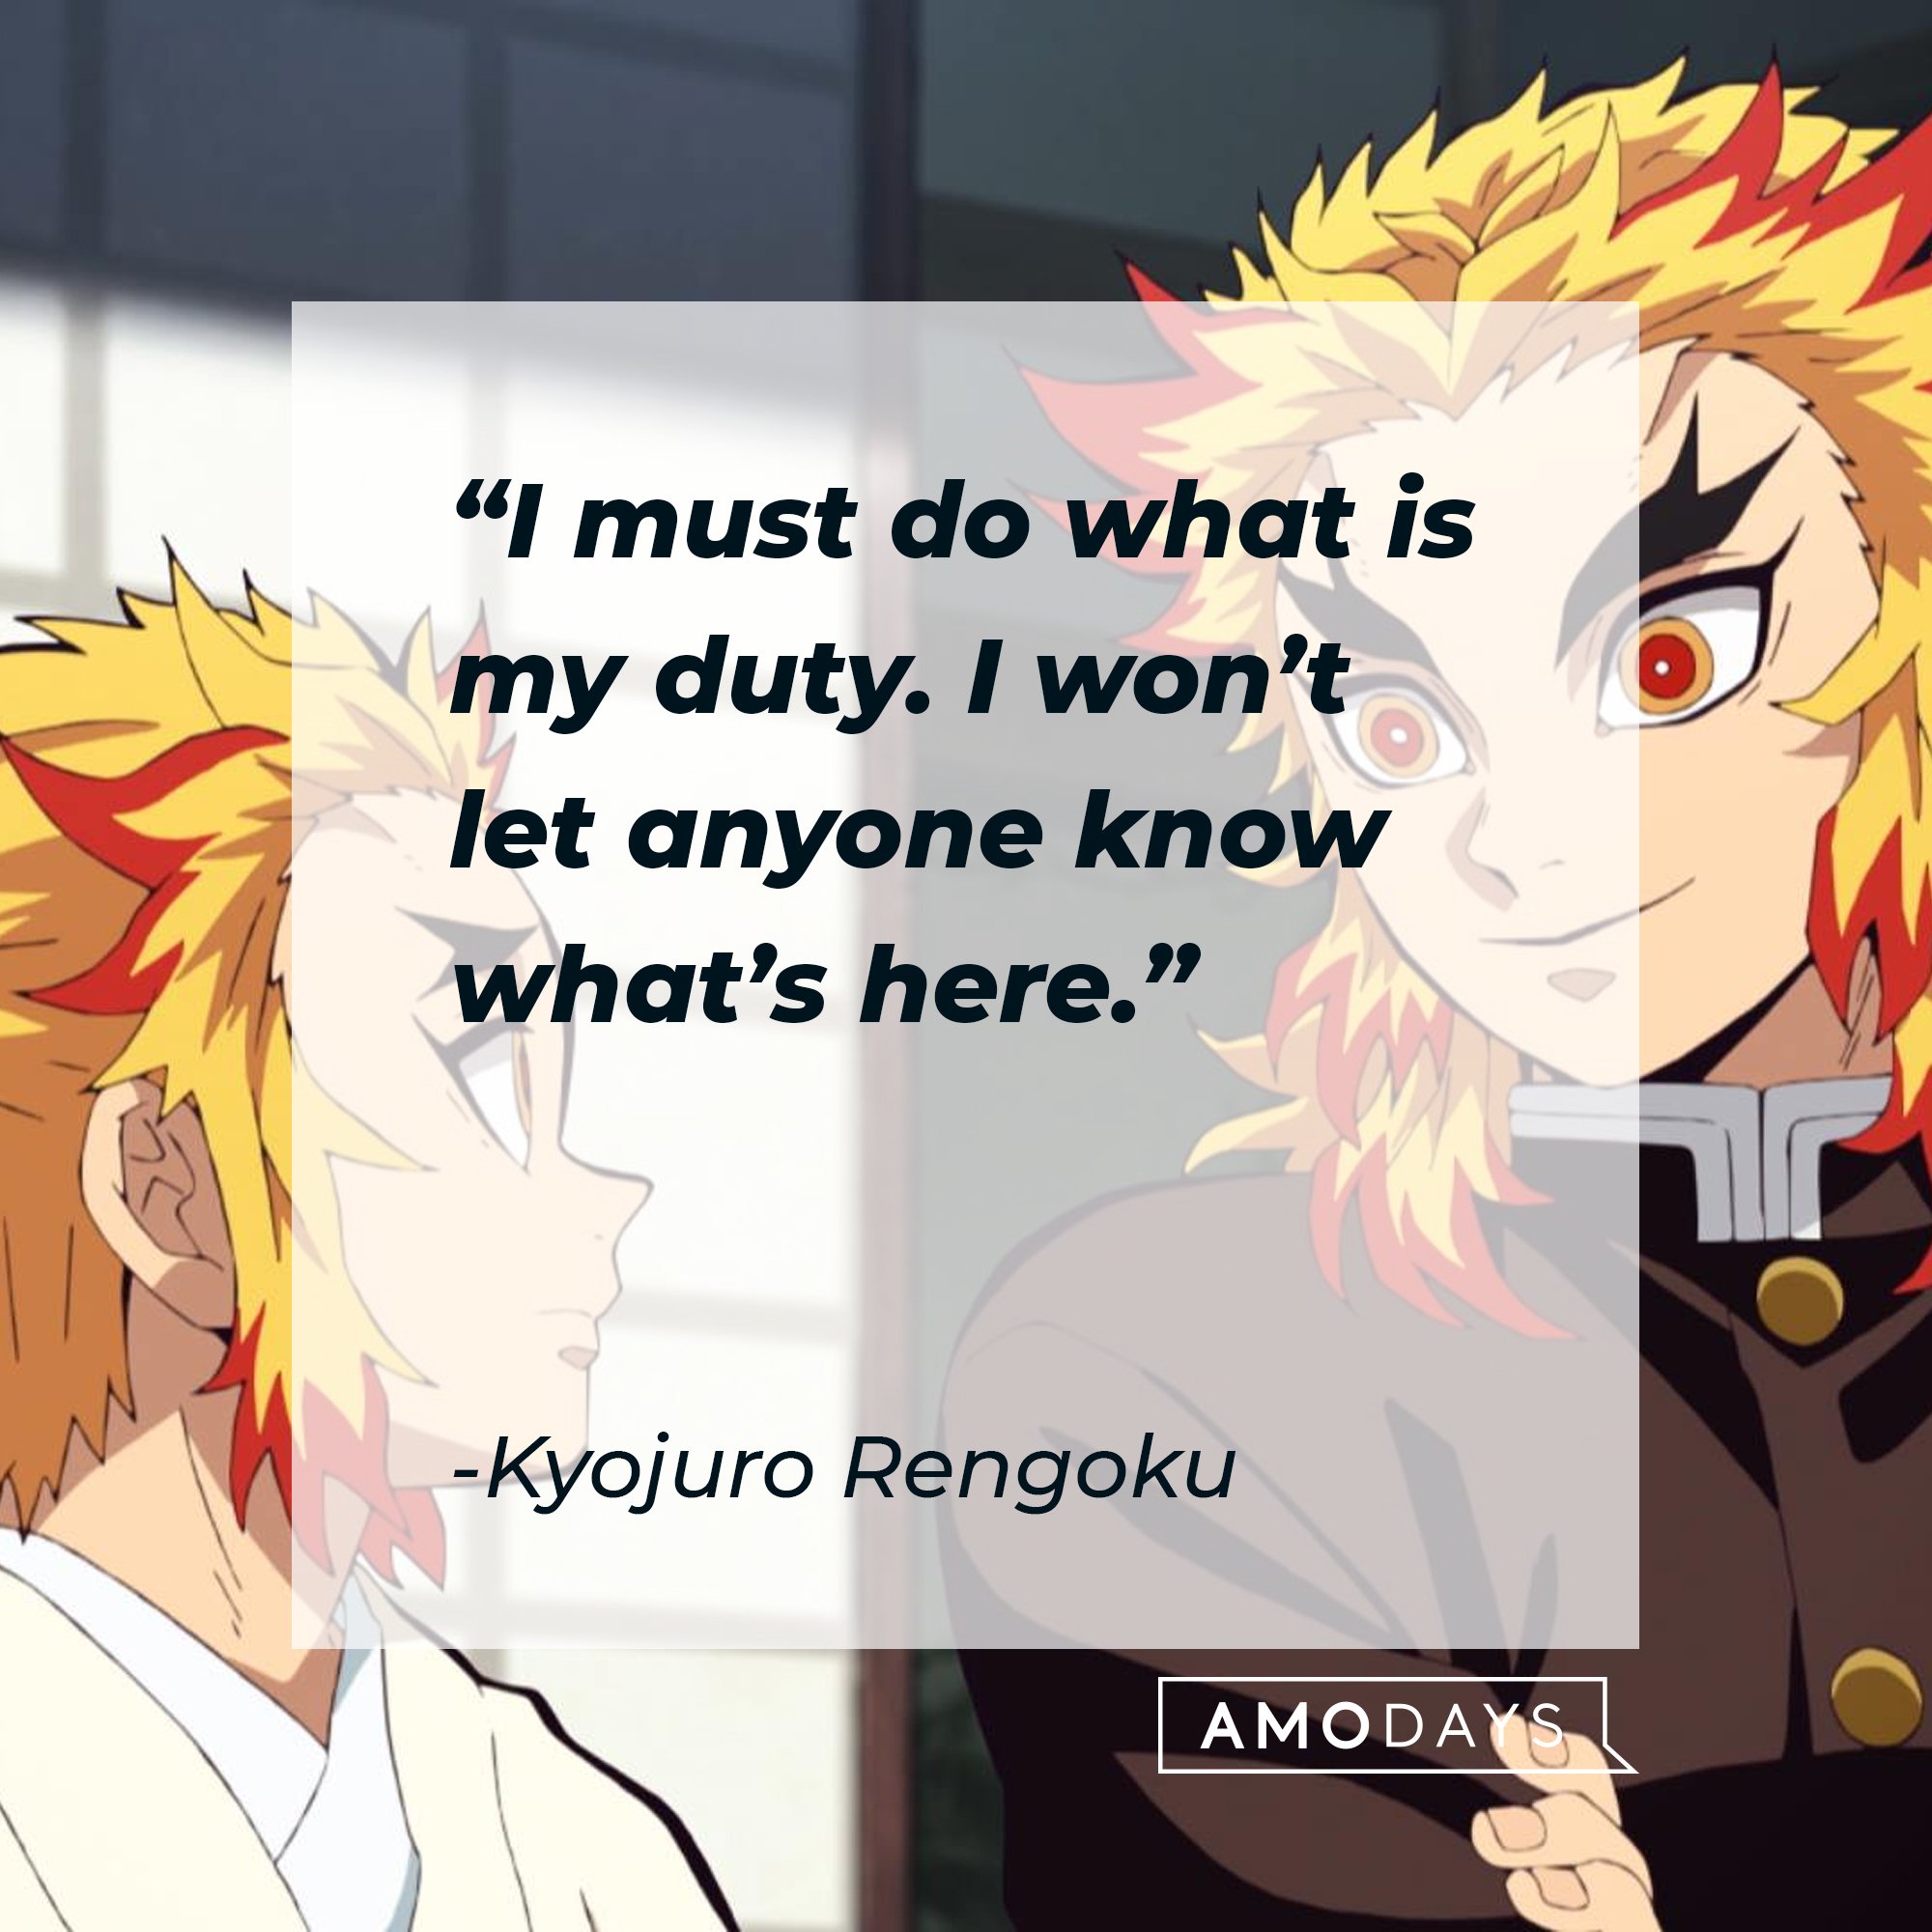 Kyojuro Rengoku’s quote: “I must do what is my duty. I won’t let anyone know what’s here.”  | Image: AmoDays